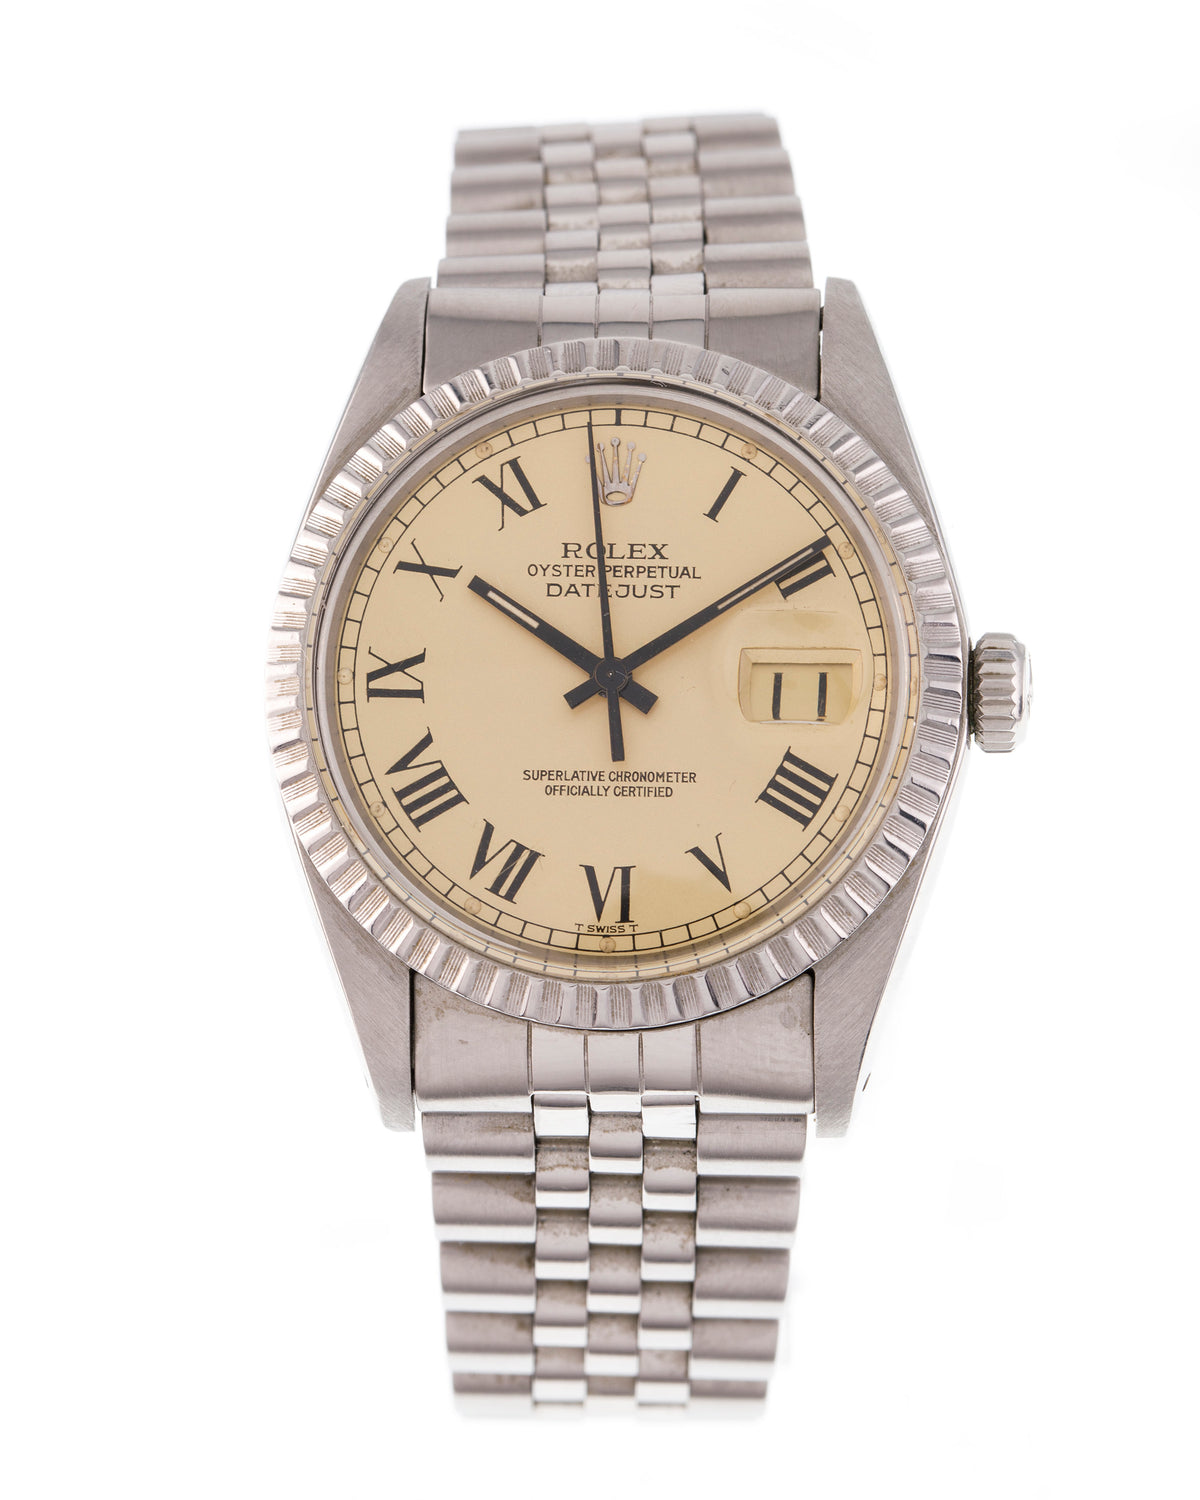 Rolex Oyster Perpetual Date Just with special cream dial